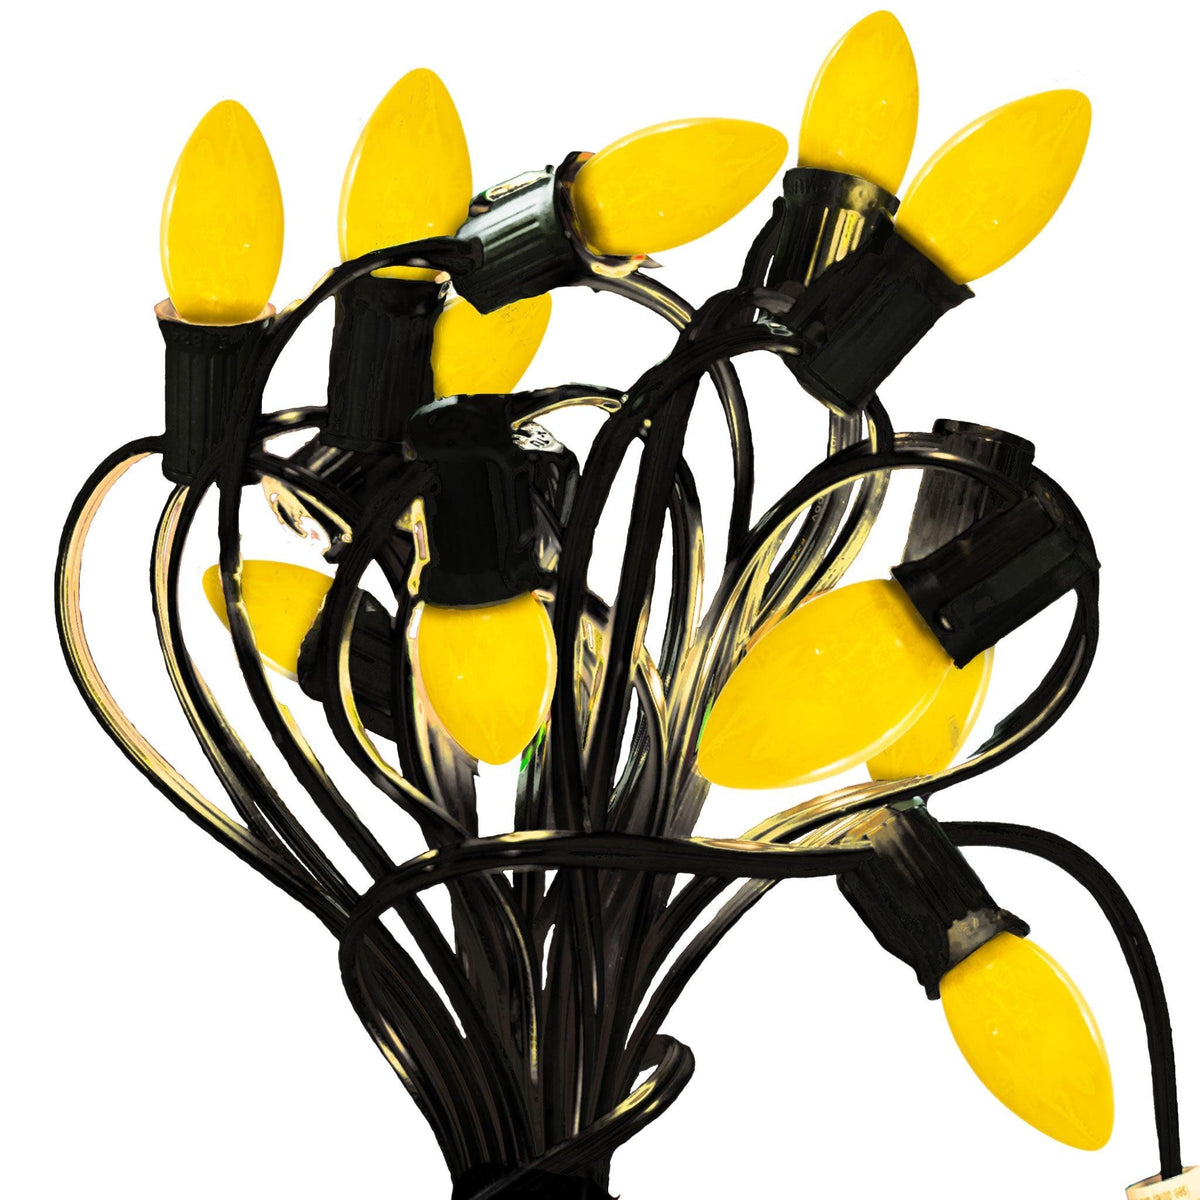 Solid Opaque Yellow Bulbs on a Black Patio String Cord.  On sale by Lee Display in C7 and C9 bulb sizes with a 25ft cord.